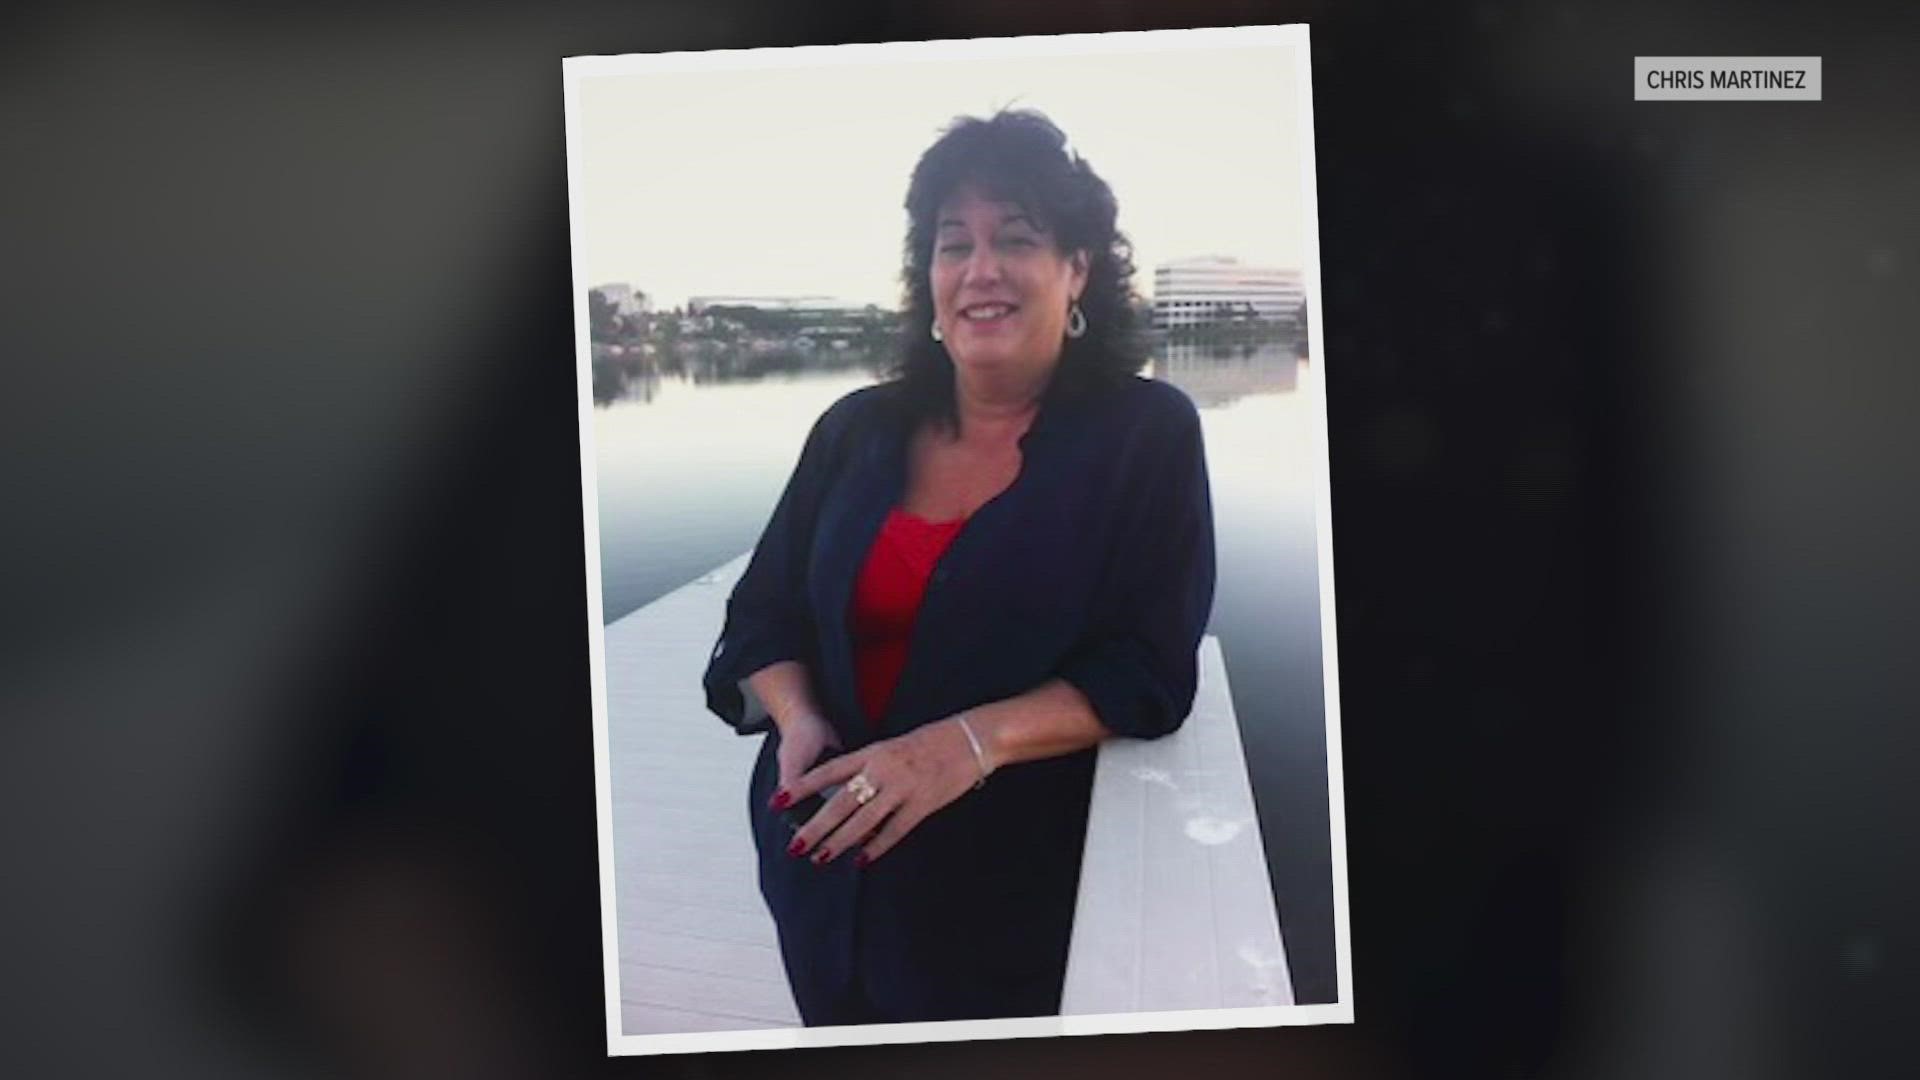 Katherine Martinez was on the way to her son's car after he called saying he was stranded in the mud, but she also drove into water and was missing for days.